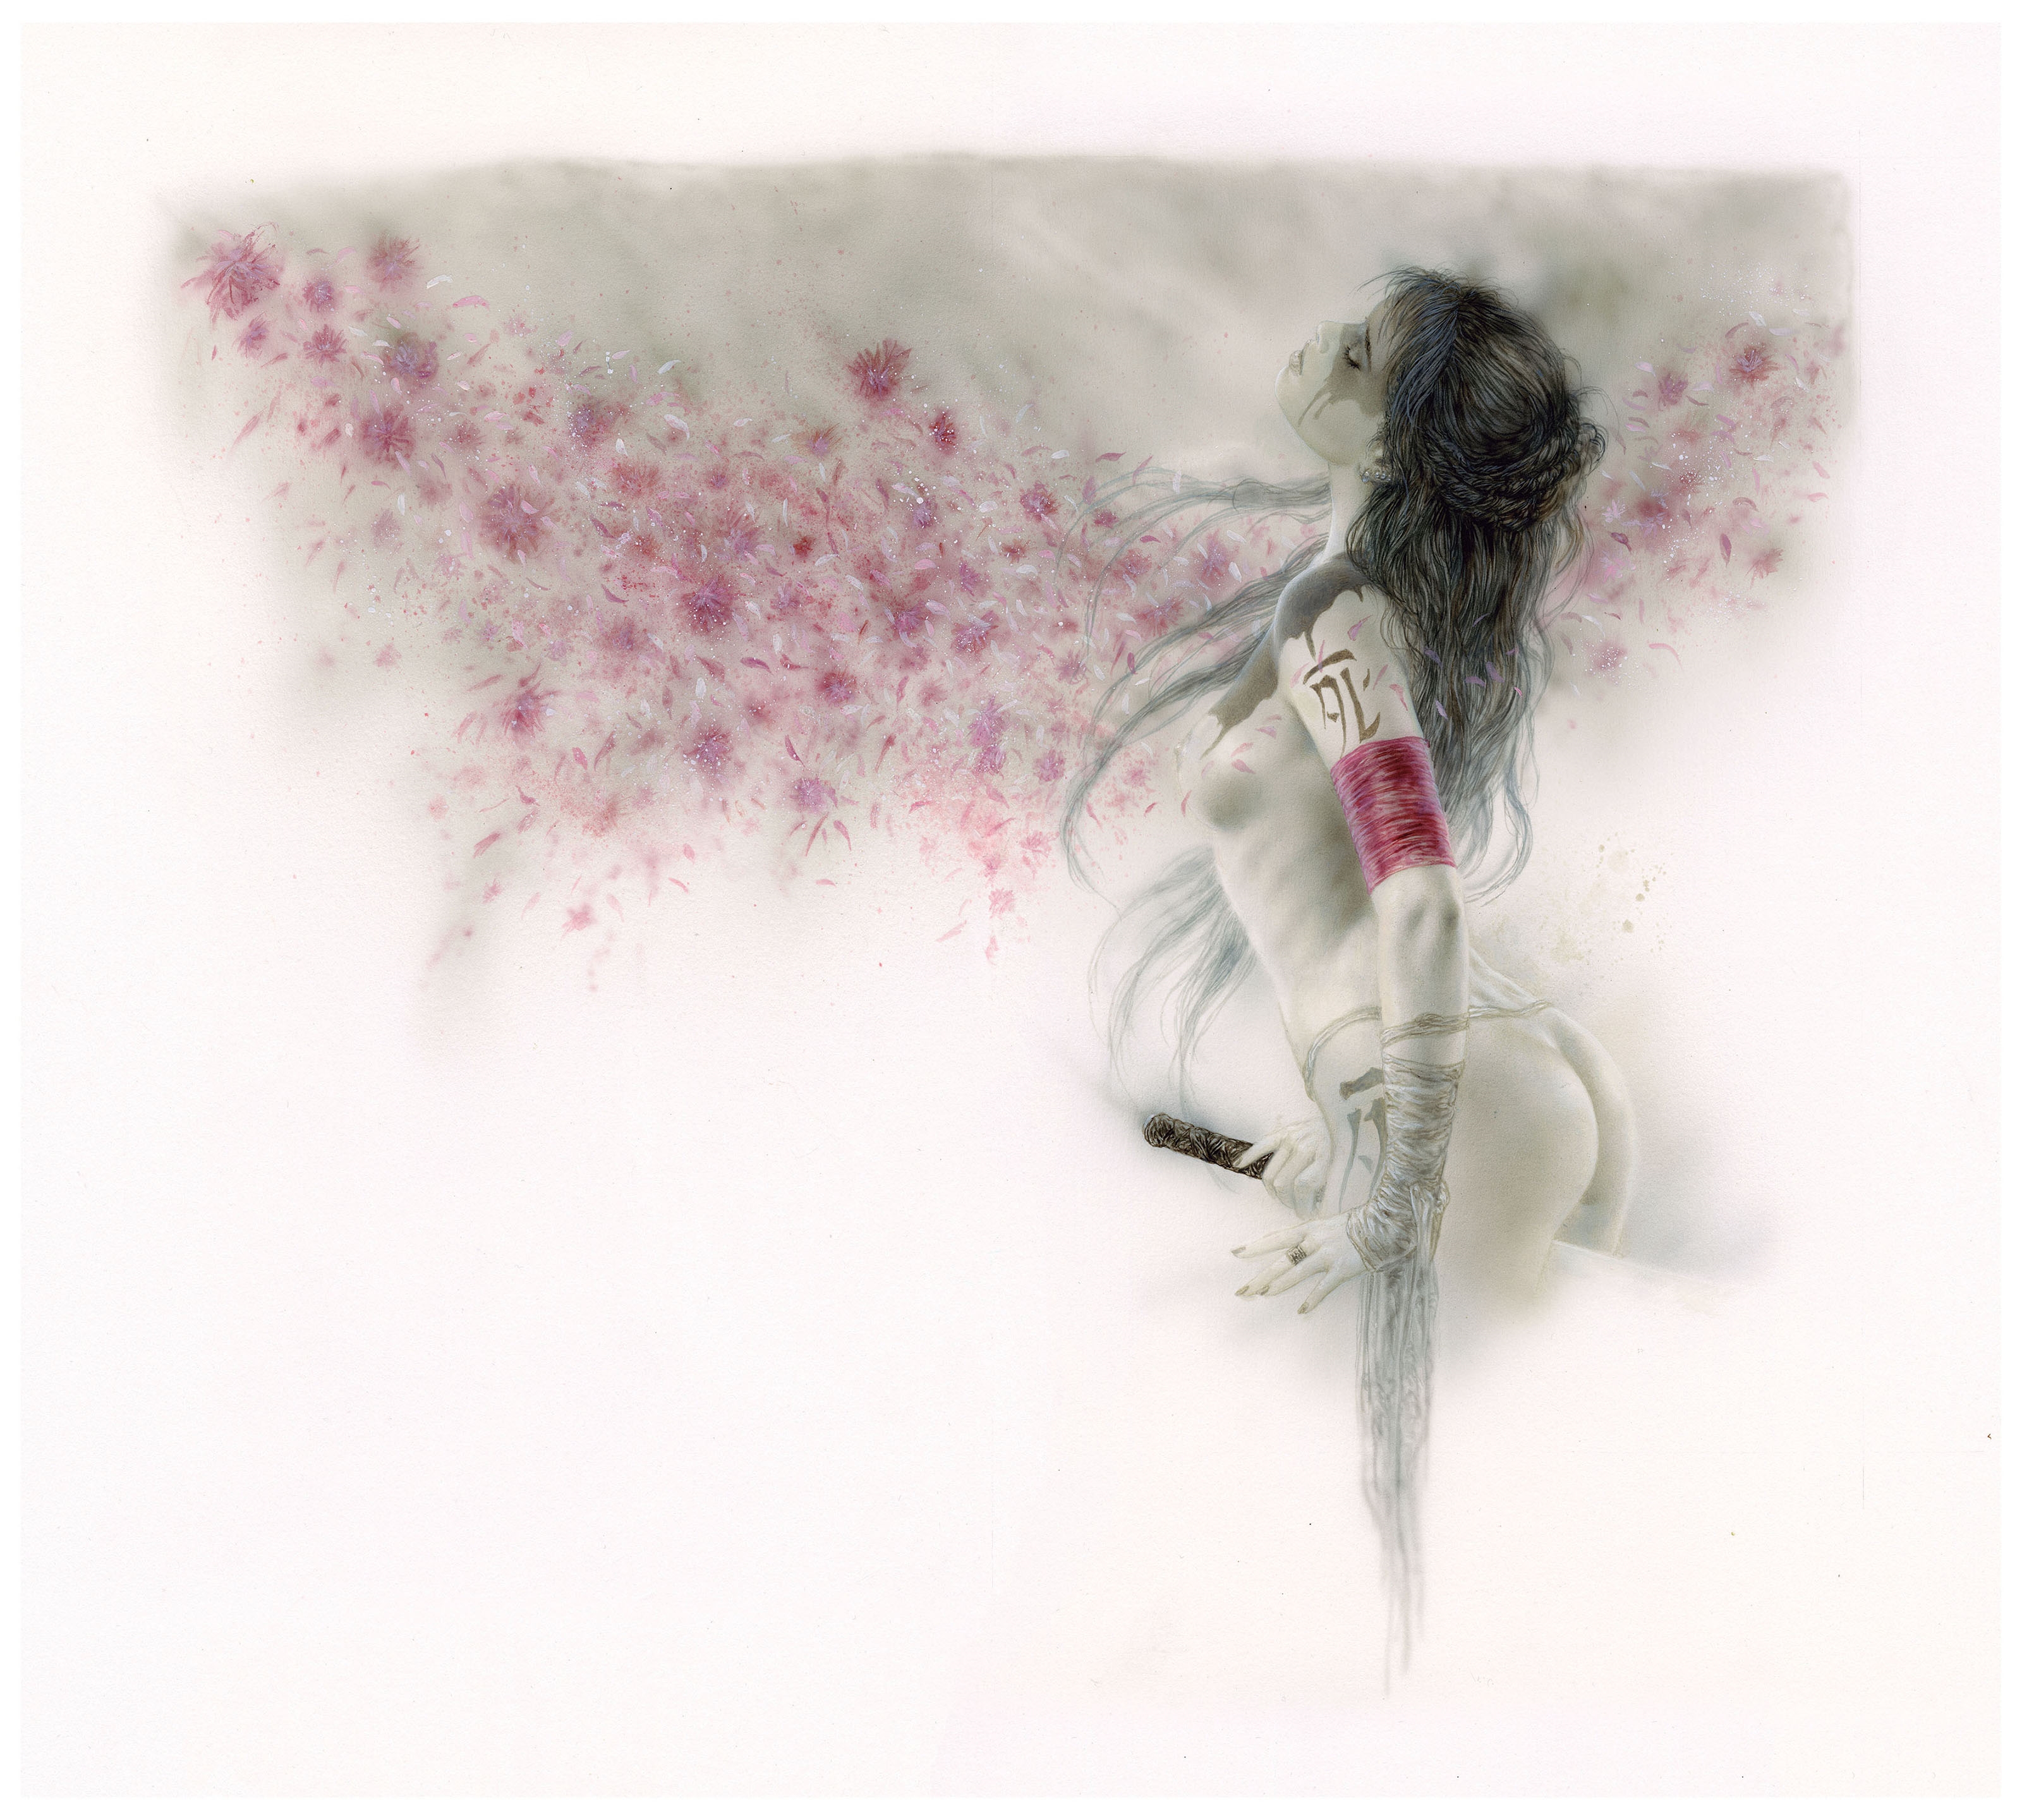 Artwork by Luis Royo, MALEFIC TIME, Made of Watercolor, acrylic, airbrush and oil on paper